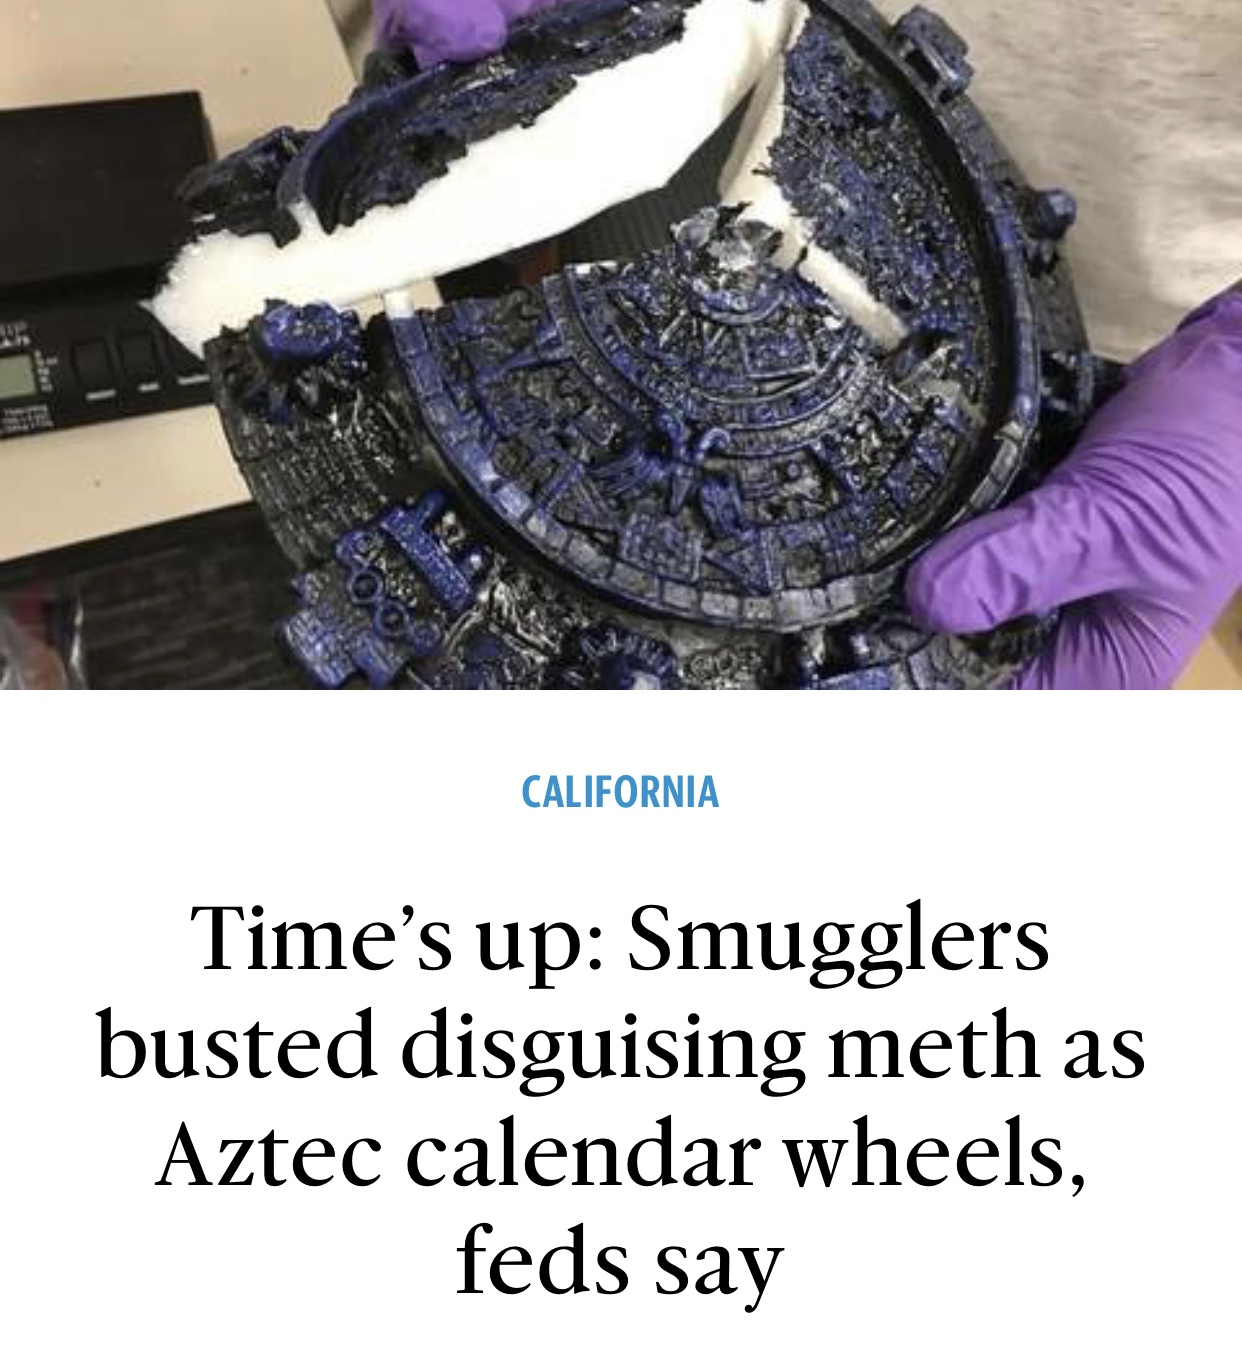 forbidden oreos - California Time's up Smugglers busted disguising meth as Aztec calendar wheels, feds say